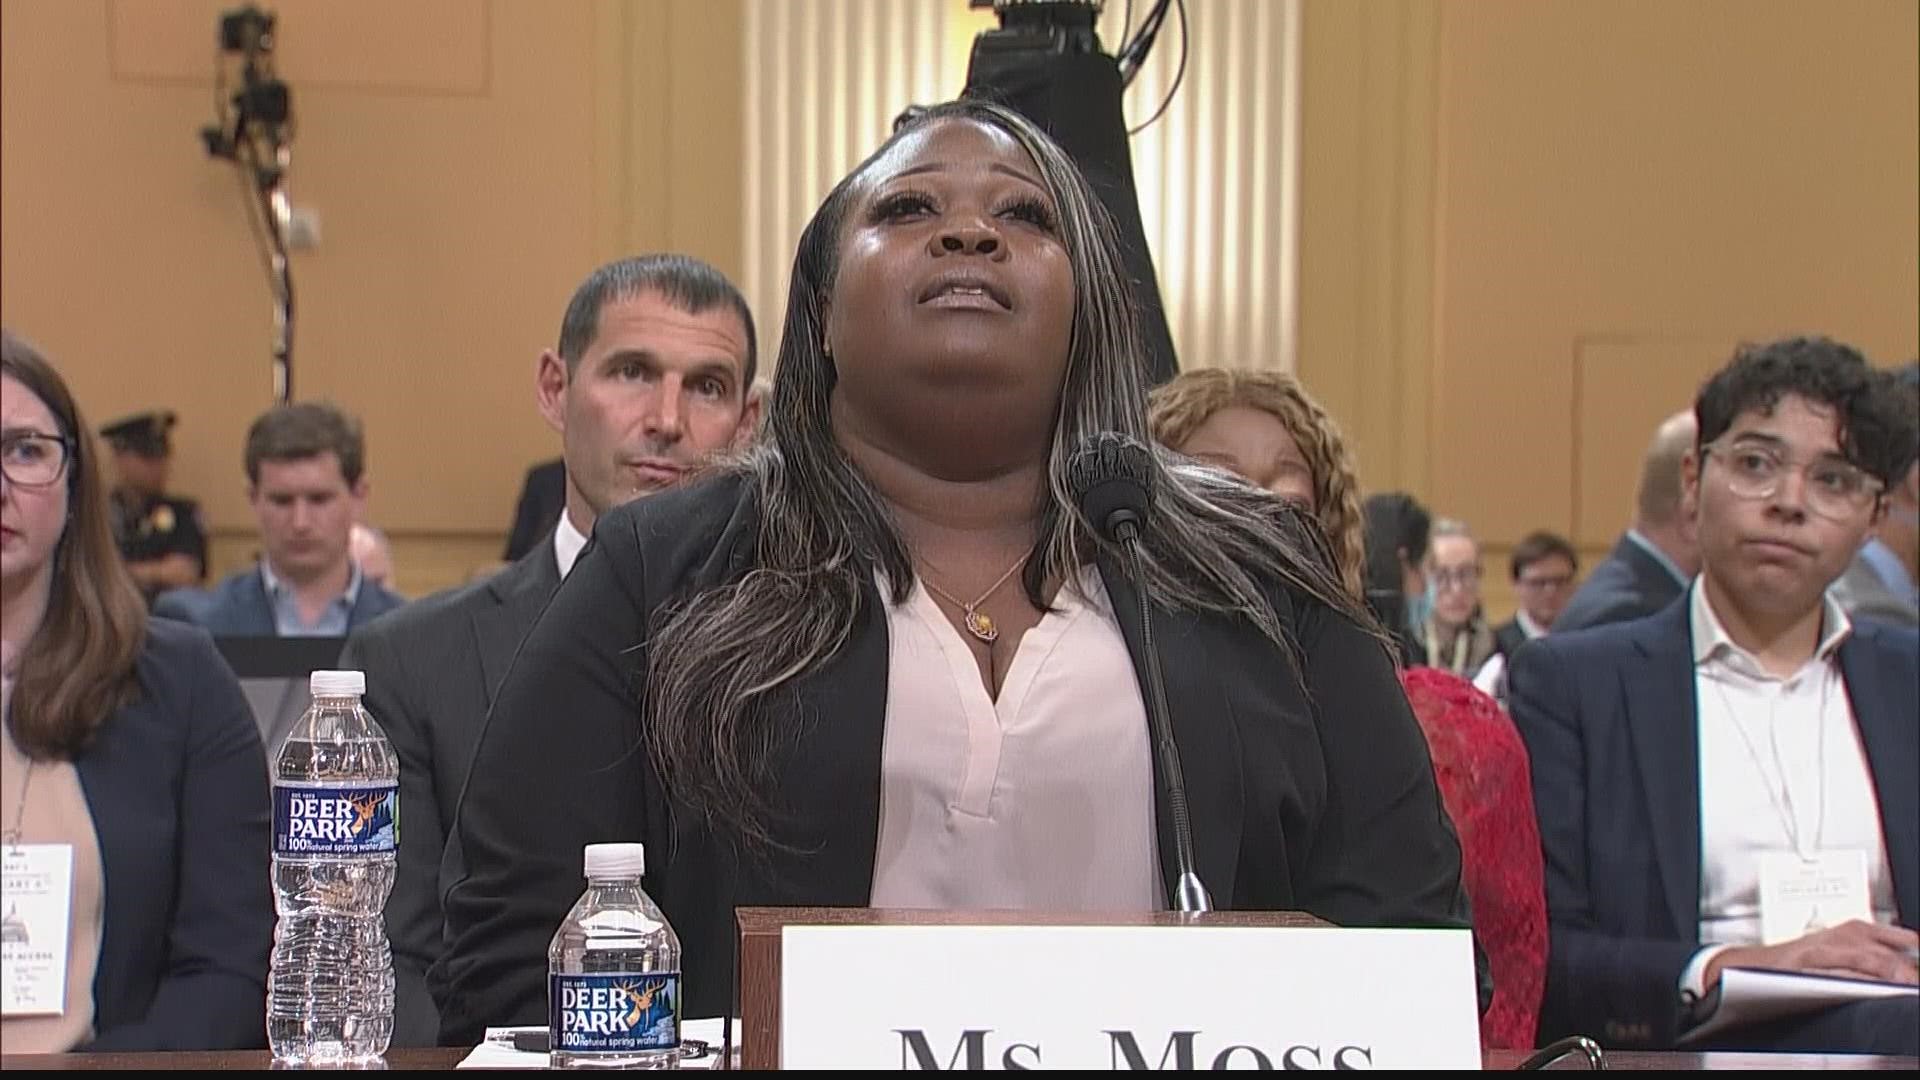 Shaye Moss appeared before the Jan. 6 panel to describe how she and her mother spent weeks under fire from former President Trump and many of his backers.